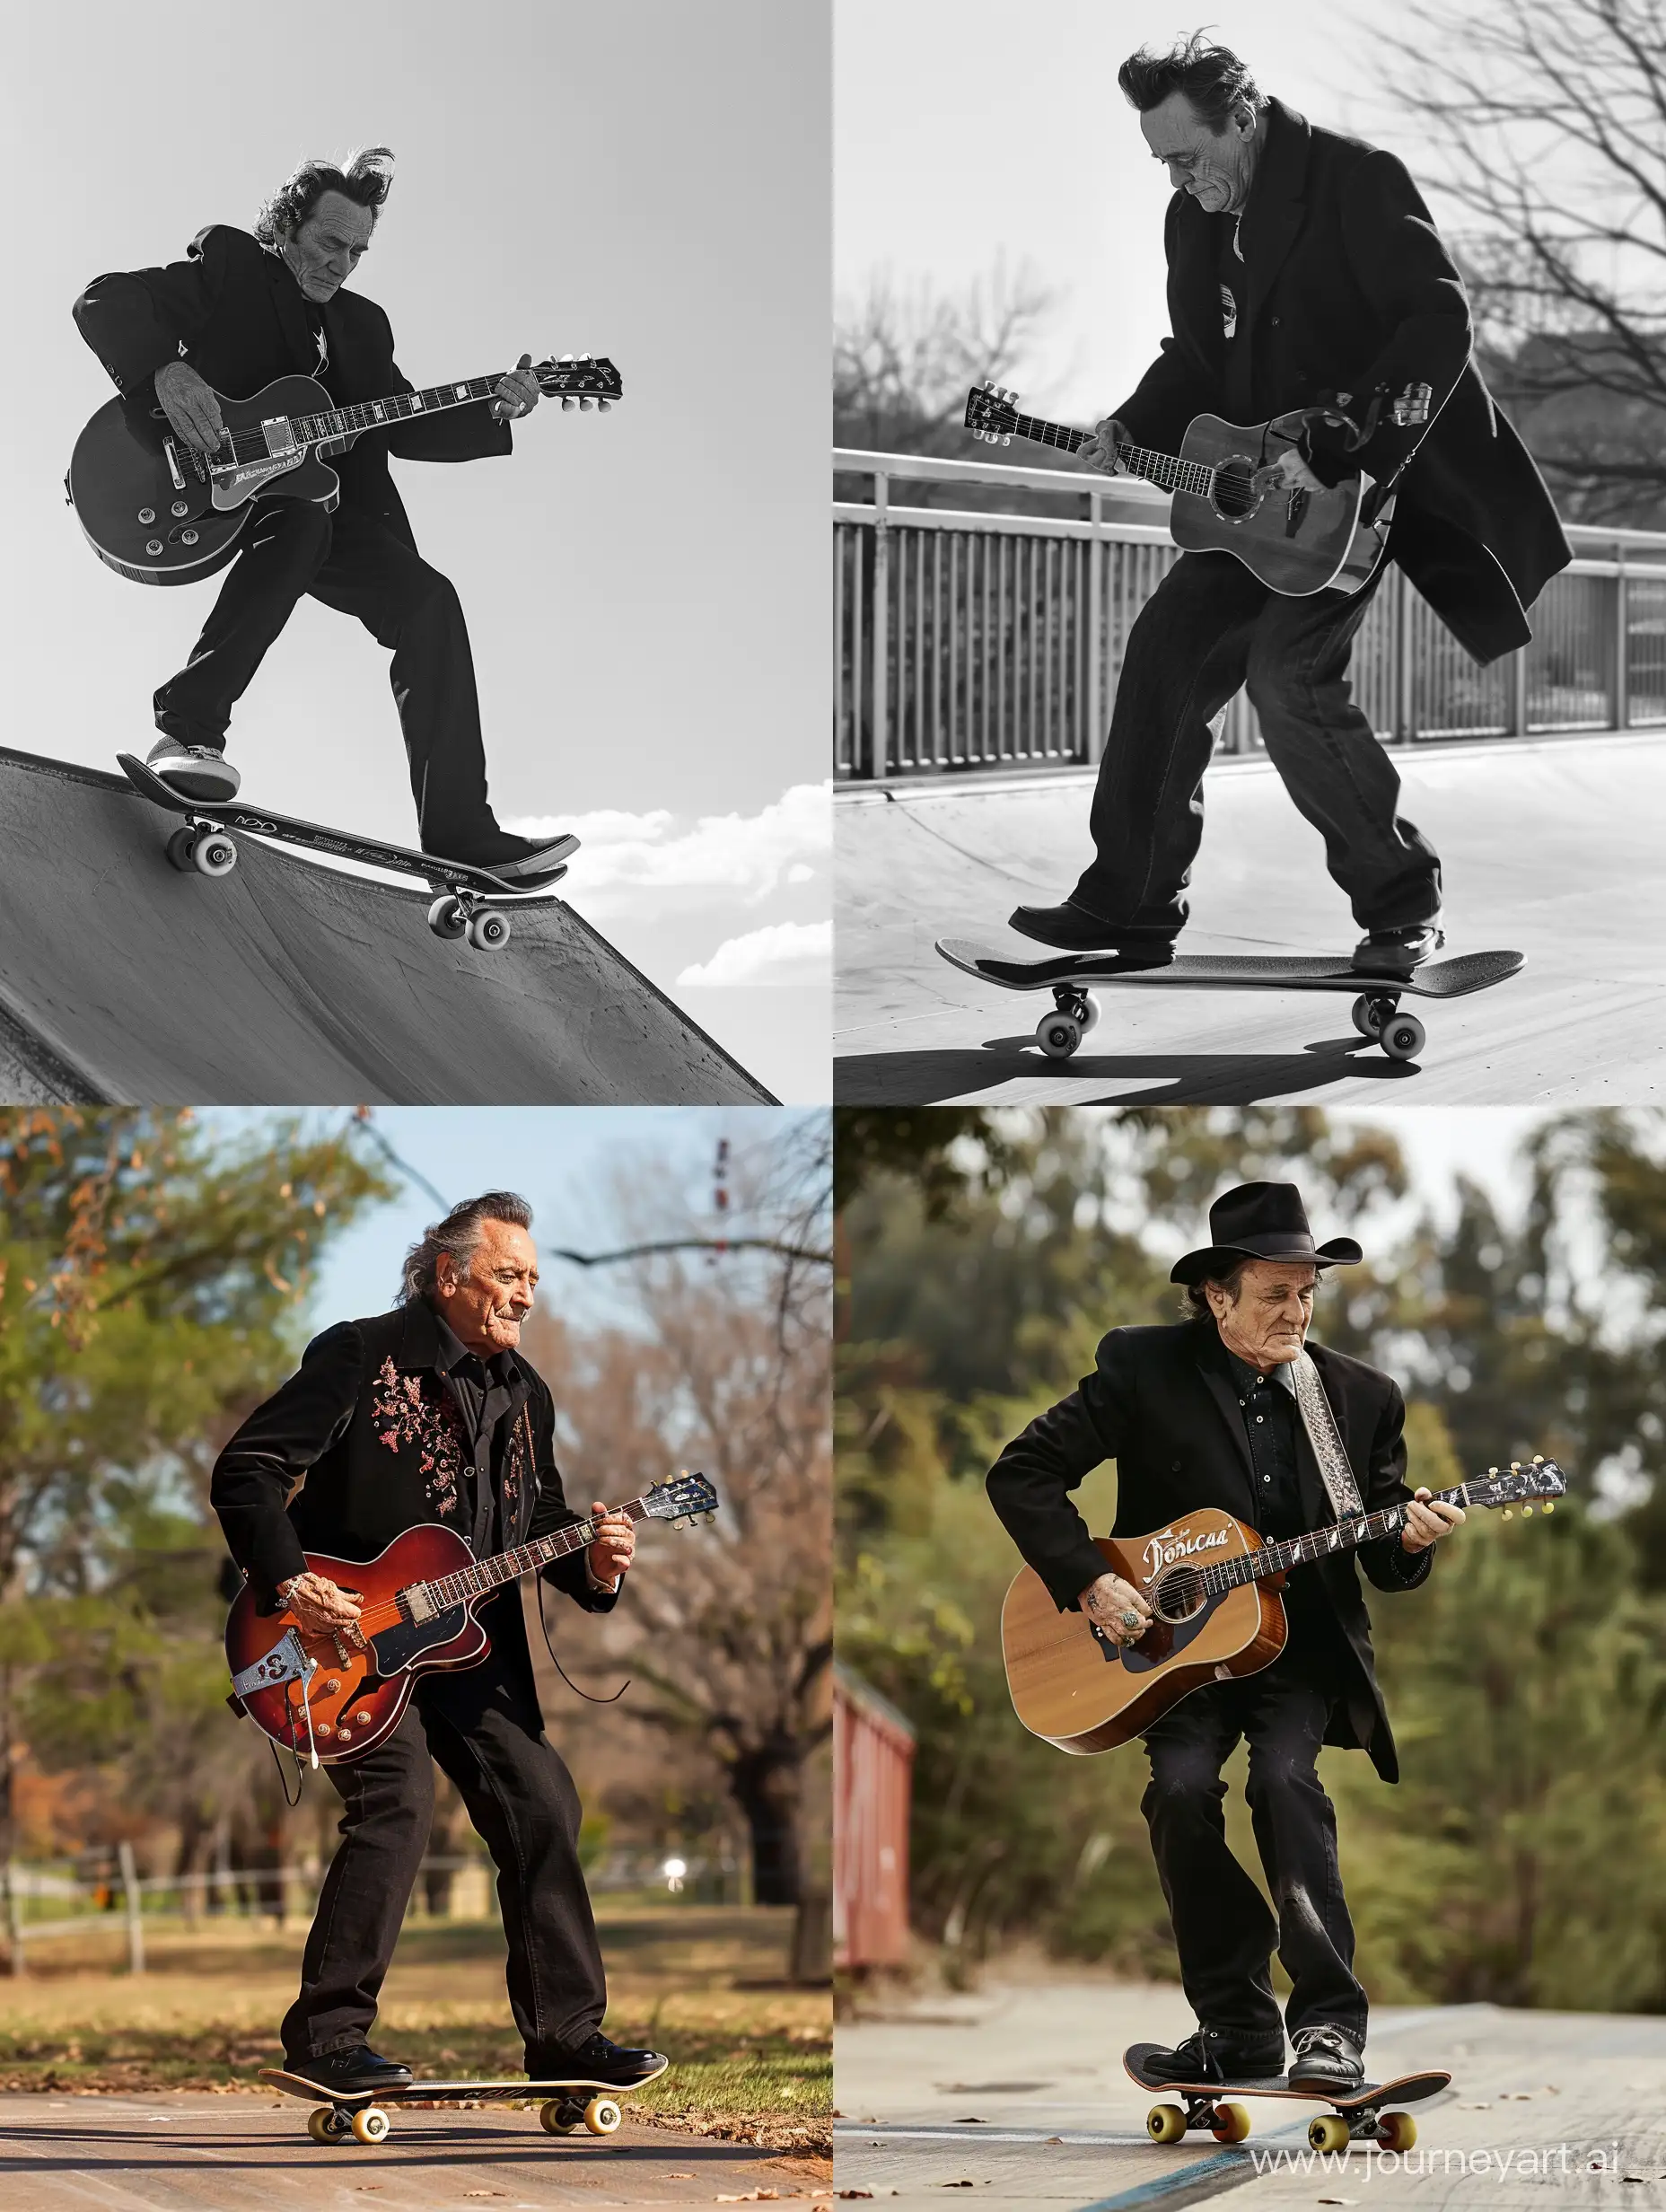 Johnny-Cash-Skateboarding-with-Guitar-in-Urban-Setting